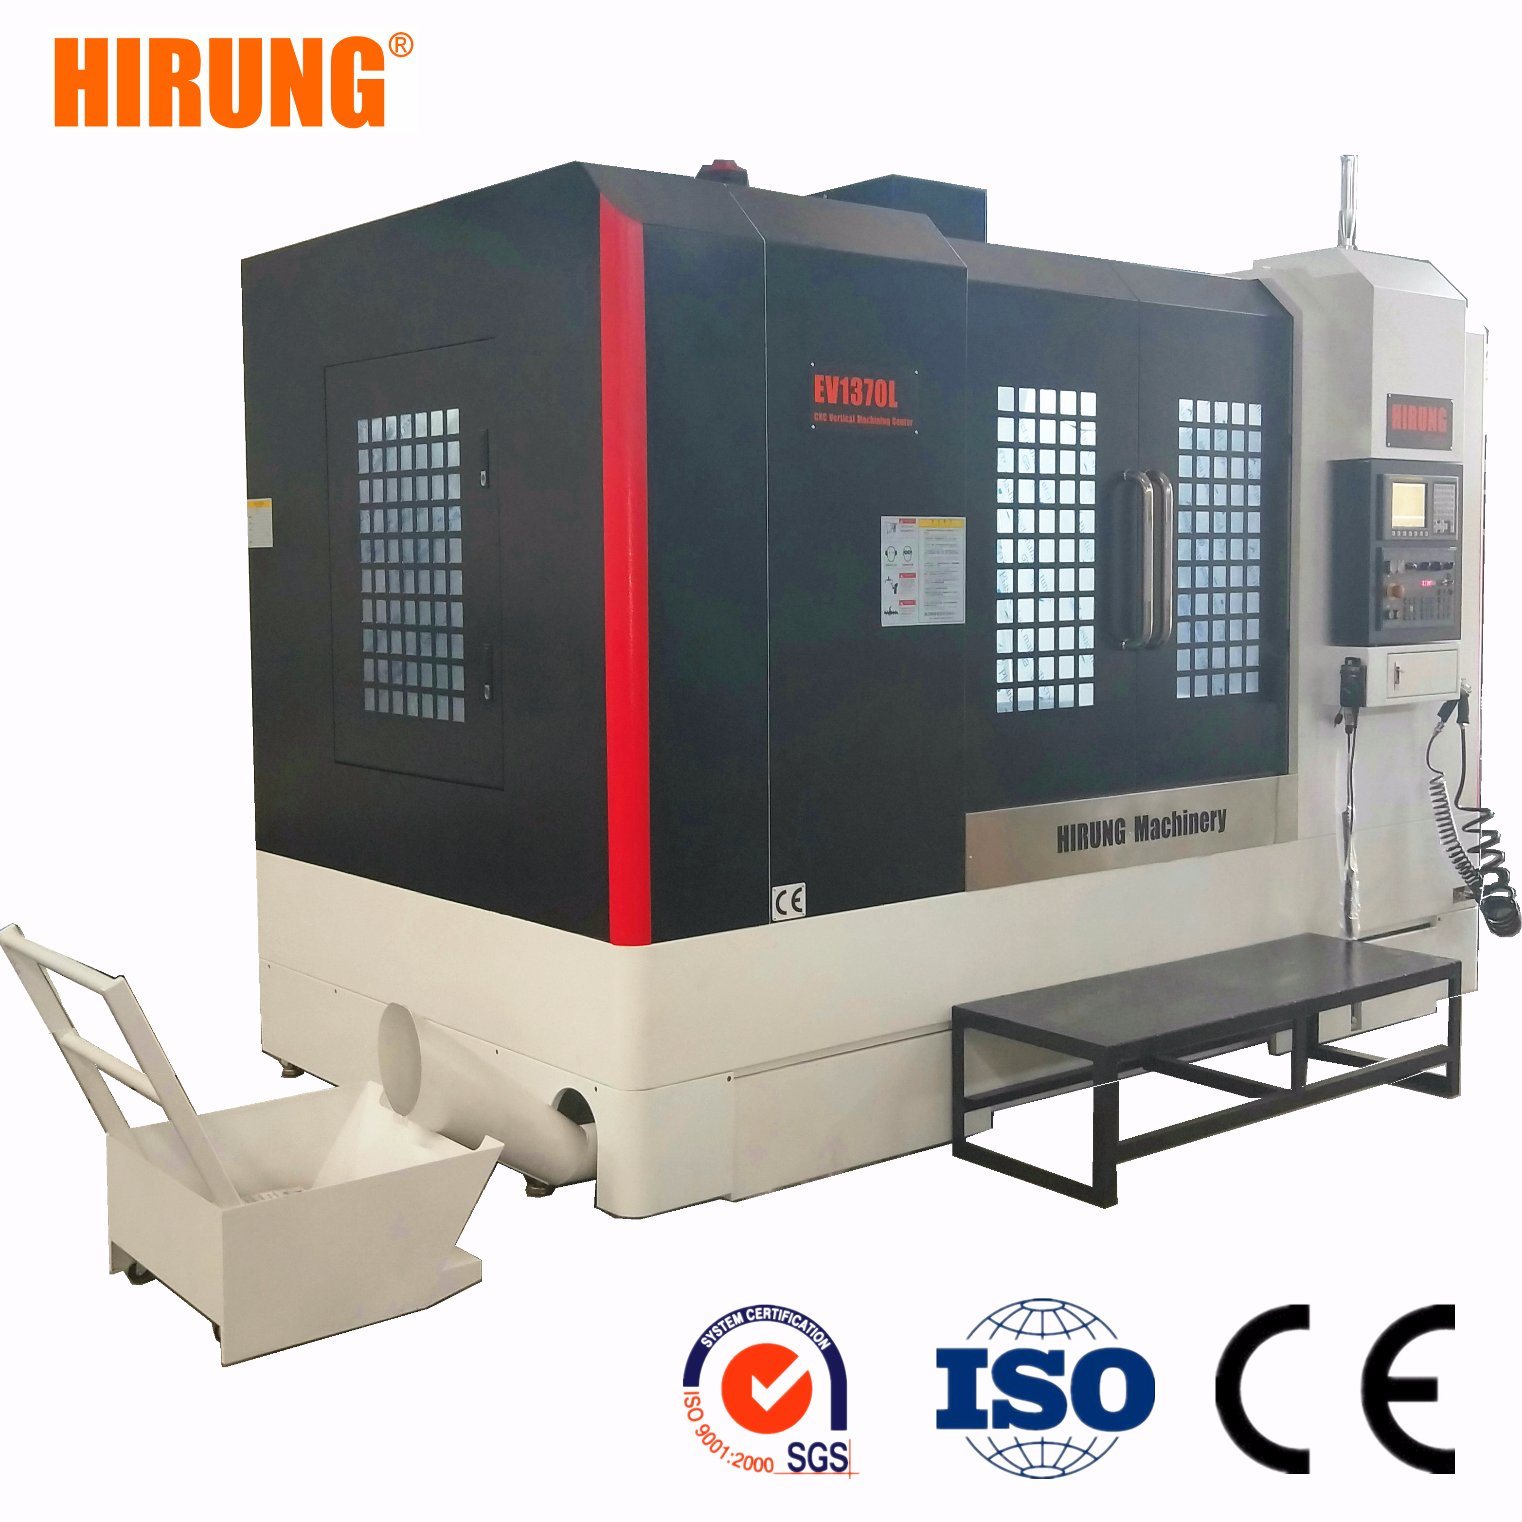 CNC Vertical Milling Machine EV1370 High Accuracy with 4kw Main Motor Power